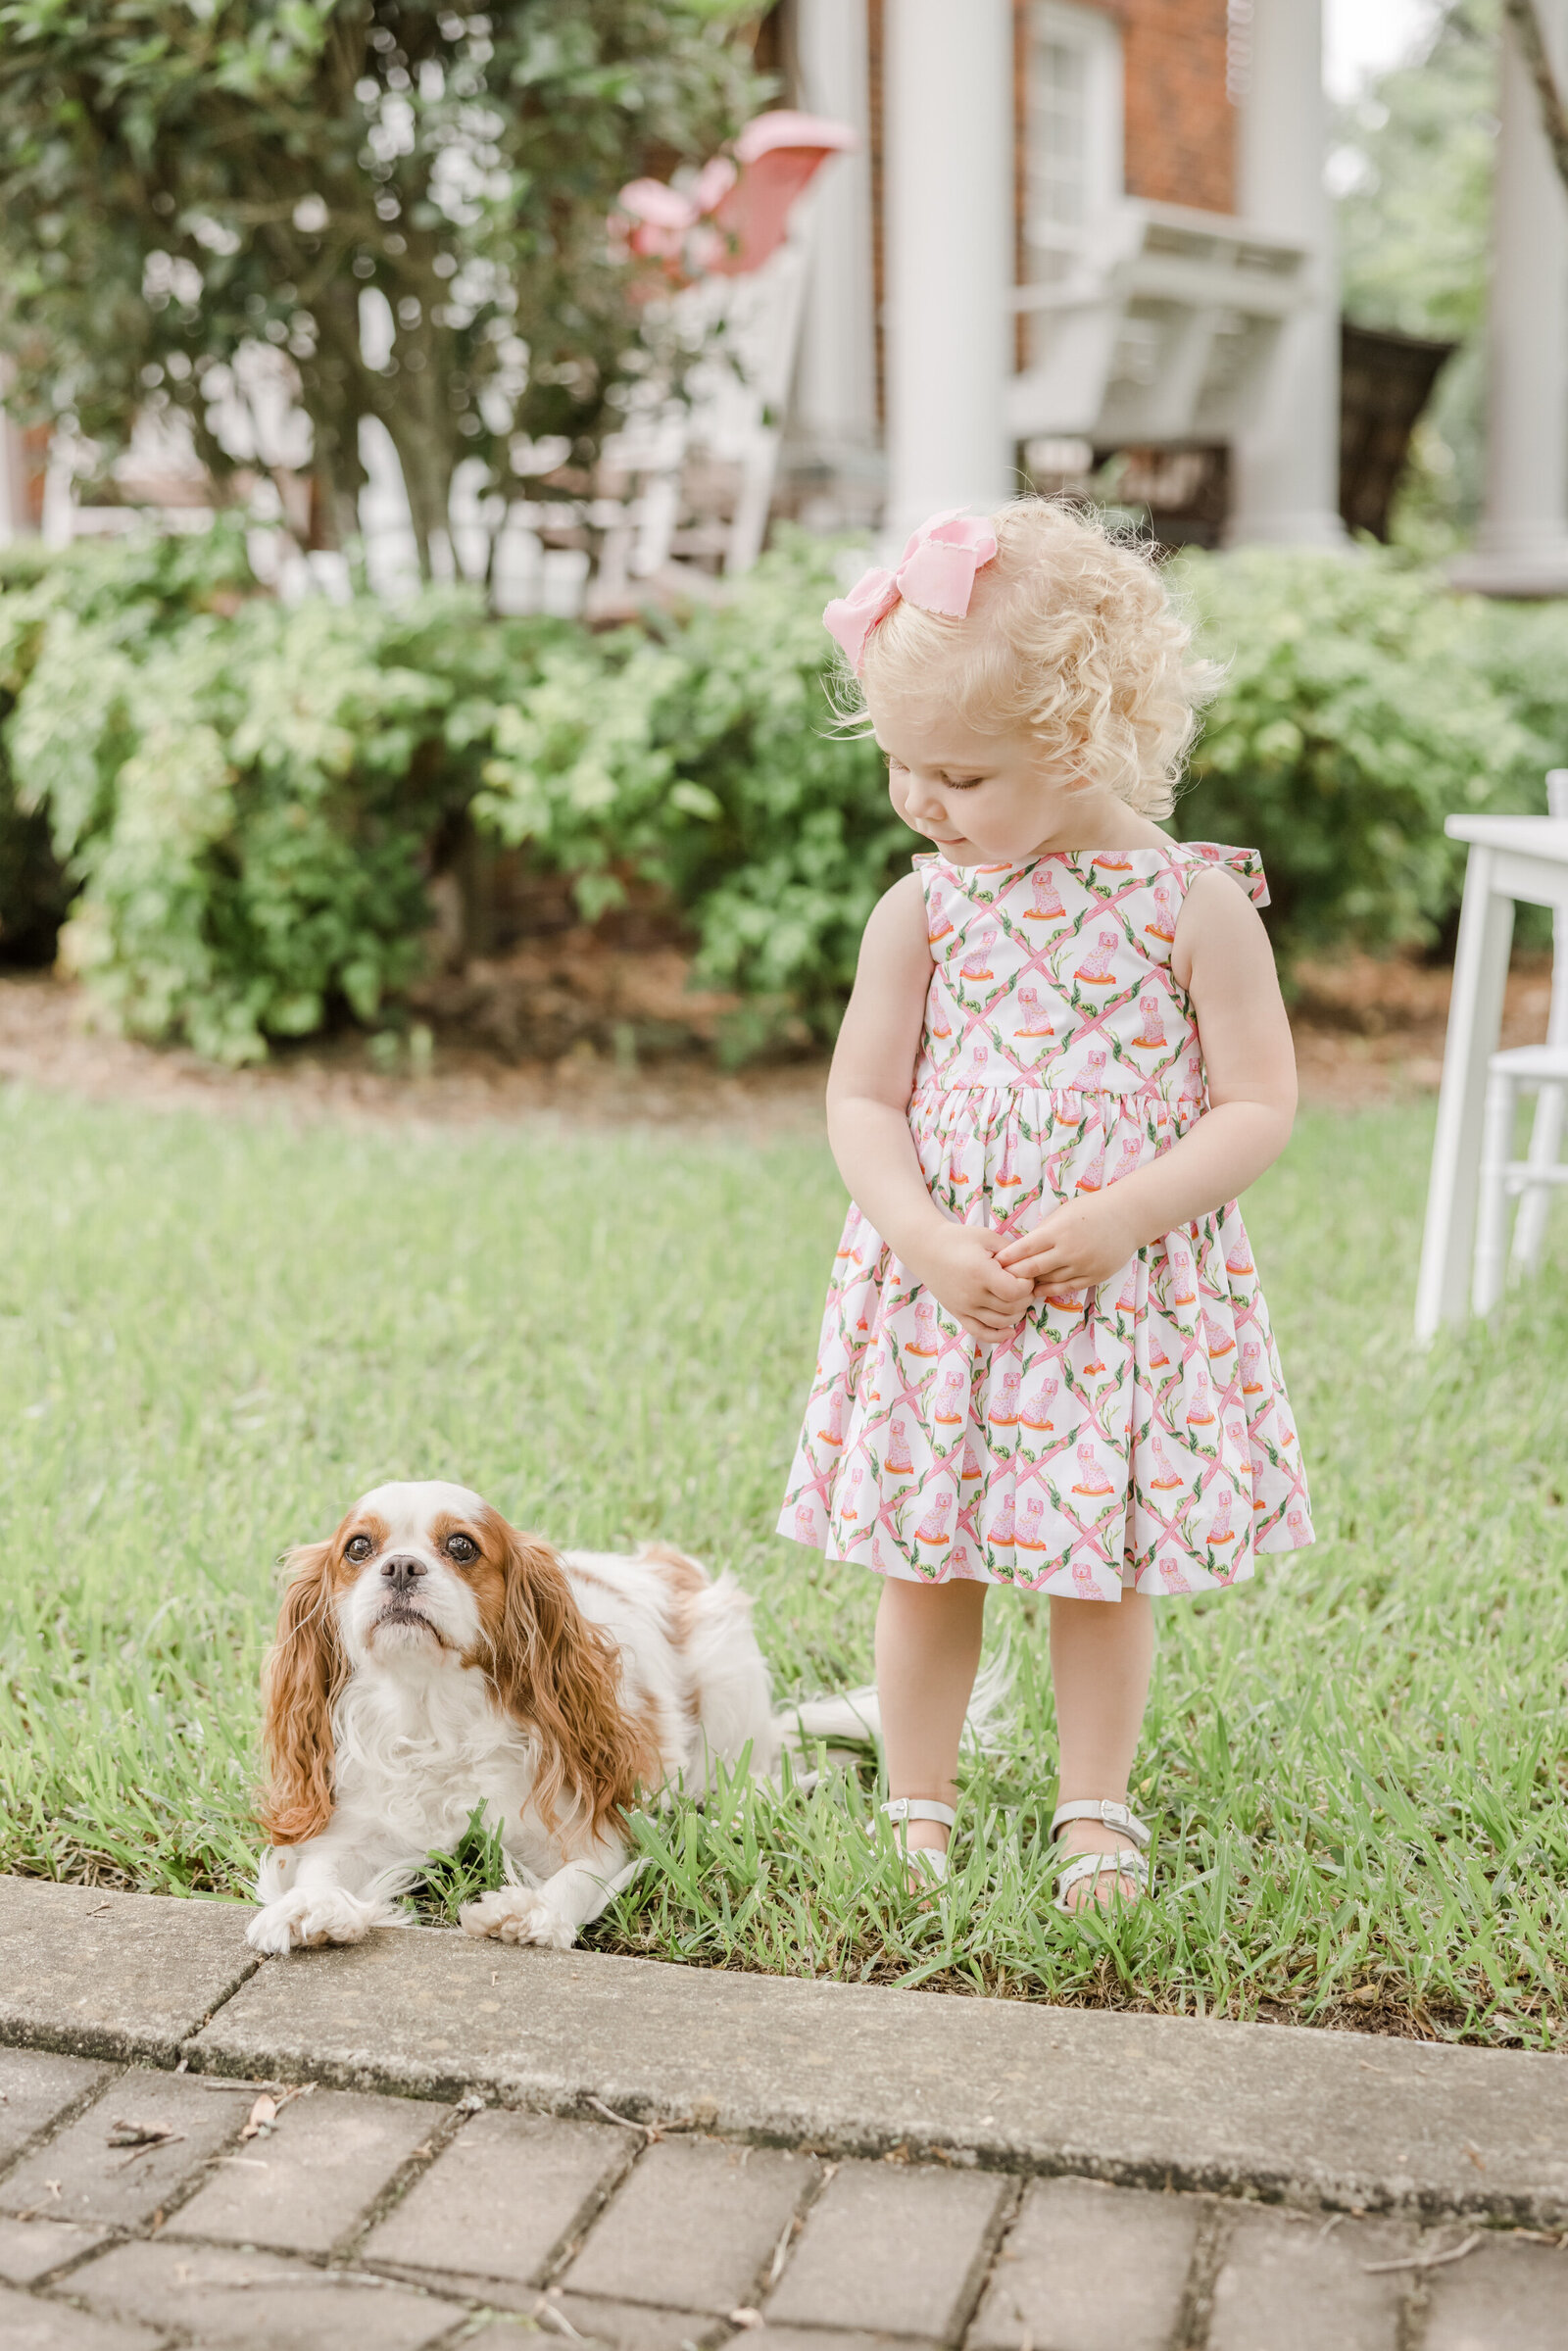 Toddler standing and looking down at her King Charles Cavalier dog in the grass.